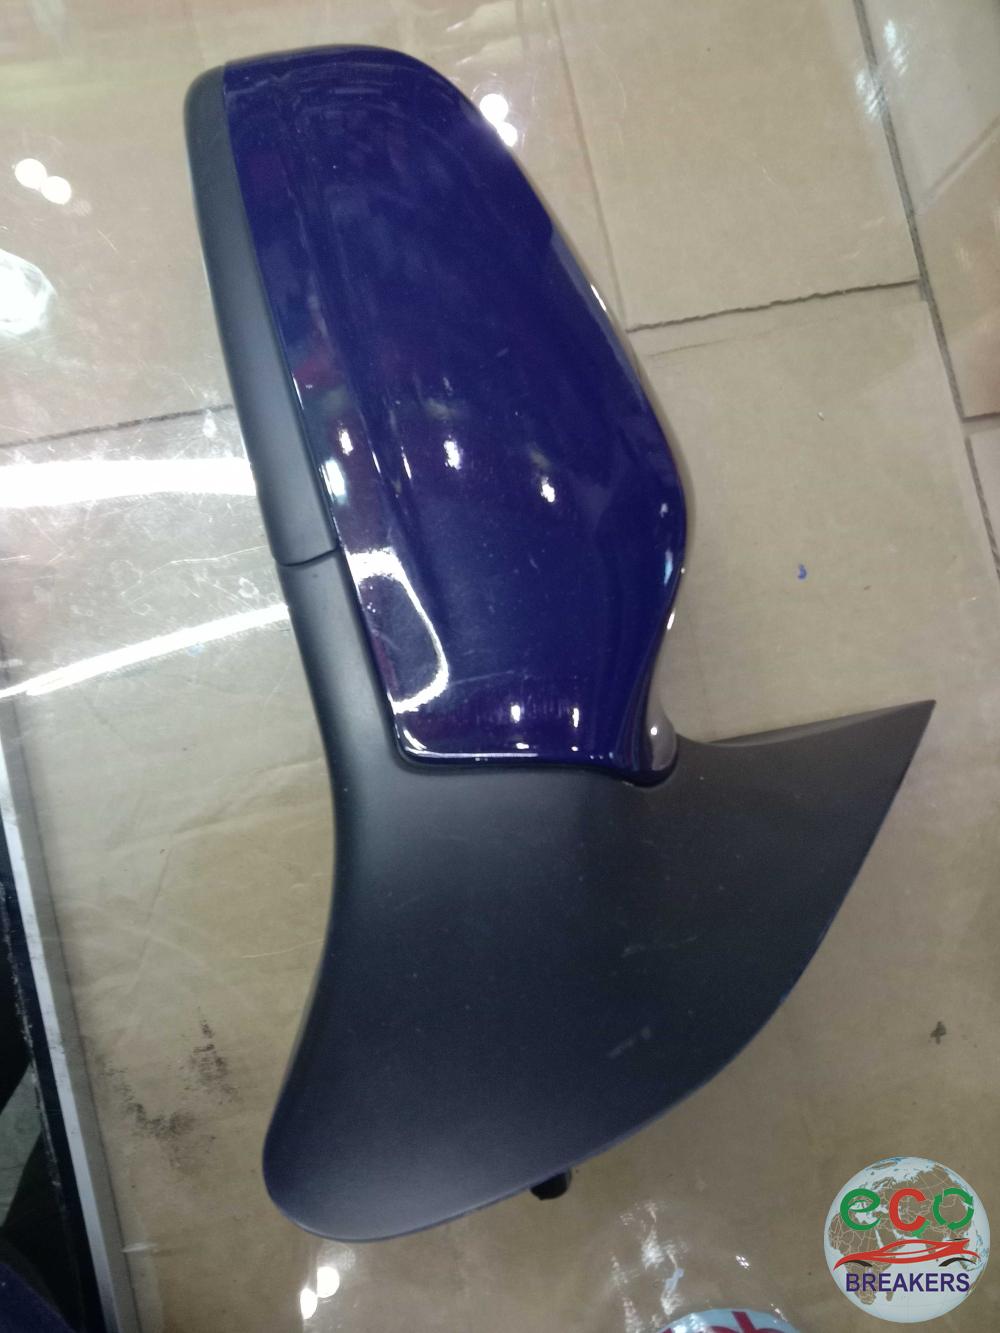 Opel Vauxhall Astra H MK5 A3300 07 Reg SRI CDTI AHL087 Wing Mirror / Side View Mirror RIGHT DRIVER OFF SIDE FRONT OSF 1.9 1910 cc Diesel Z19DTH 6 Speed Manual 3 Door Hatchback